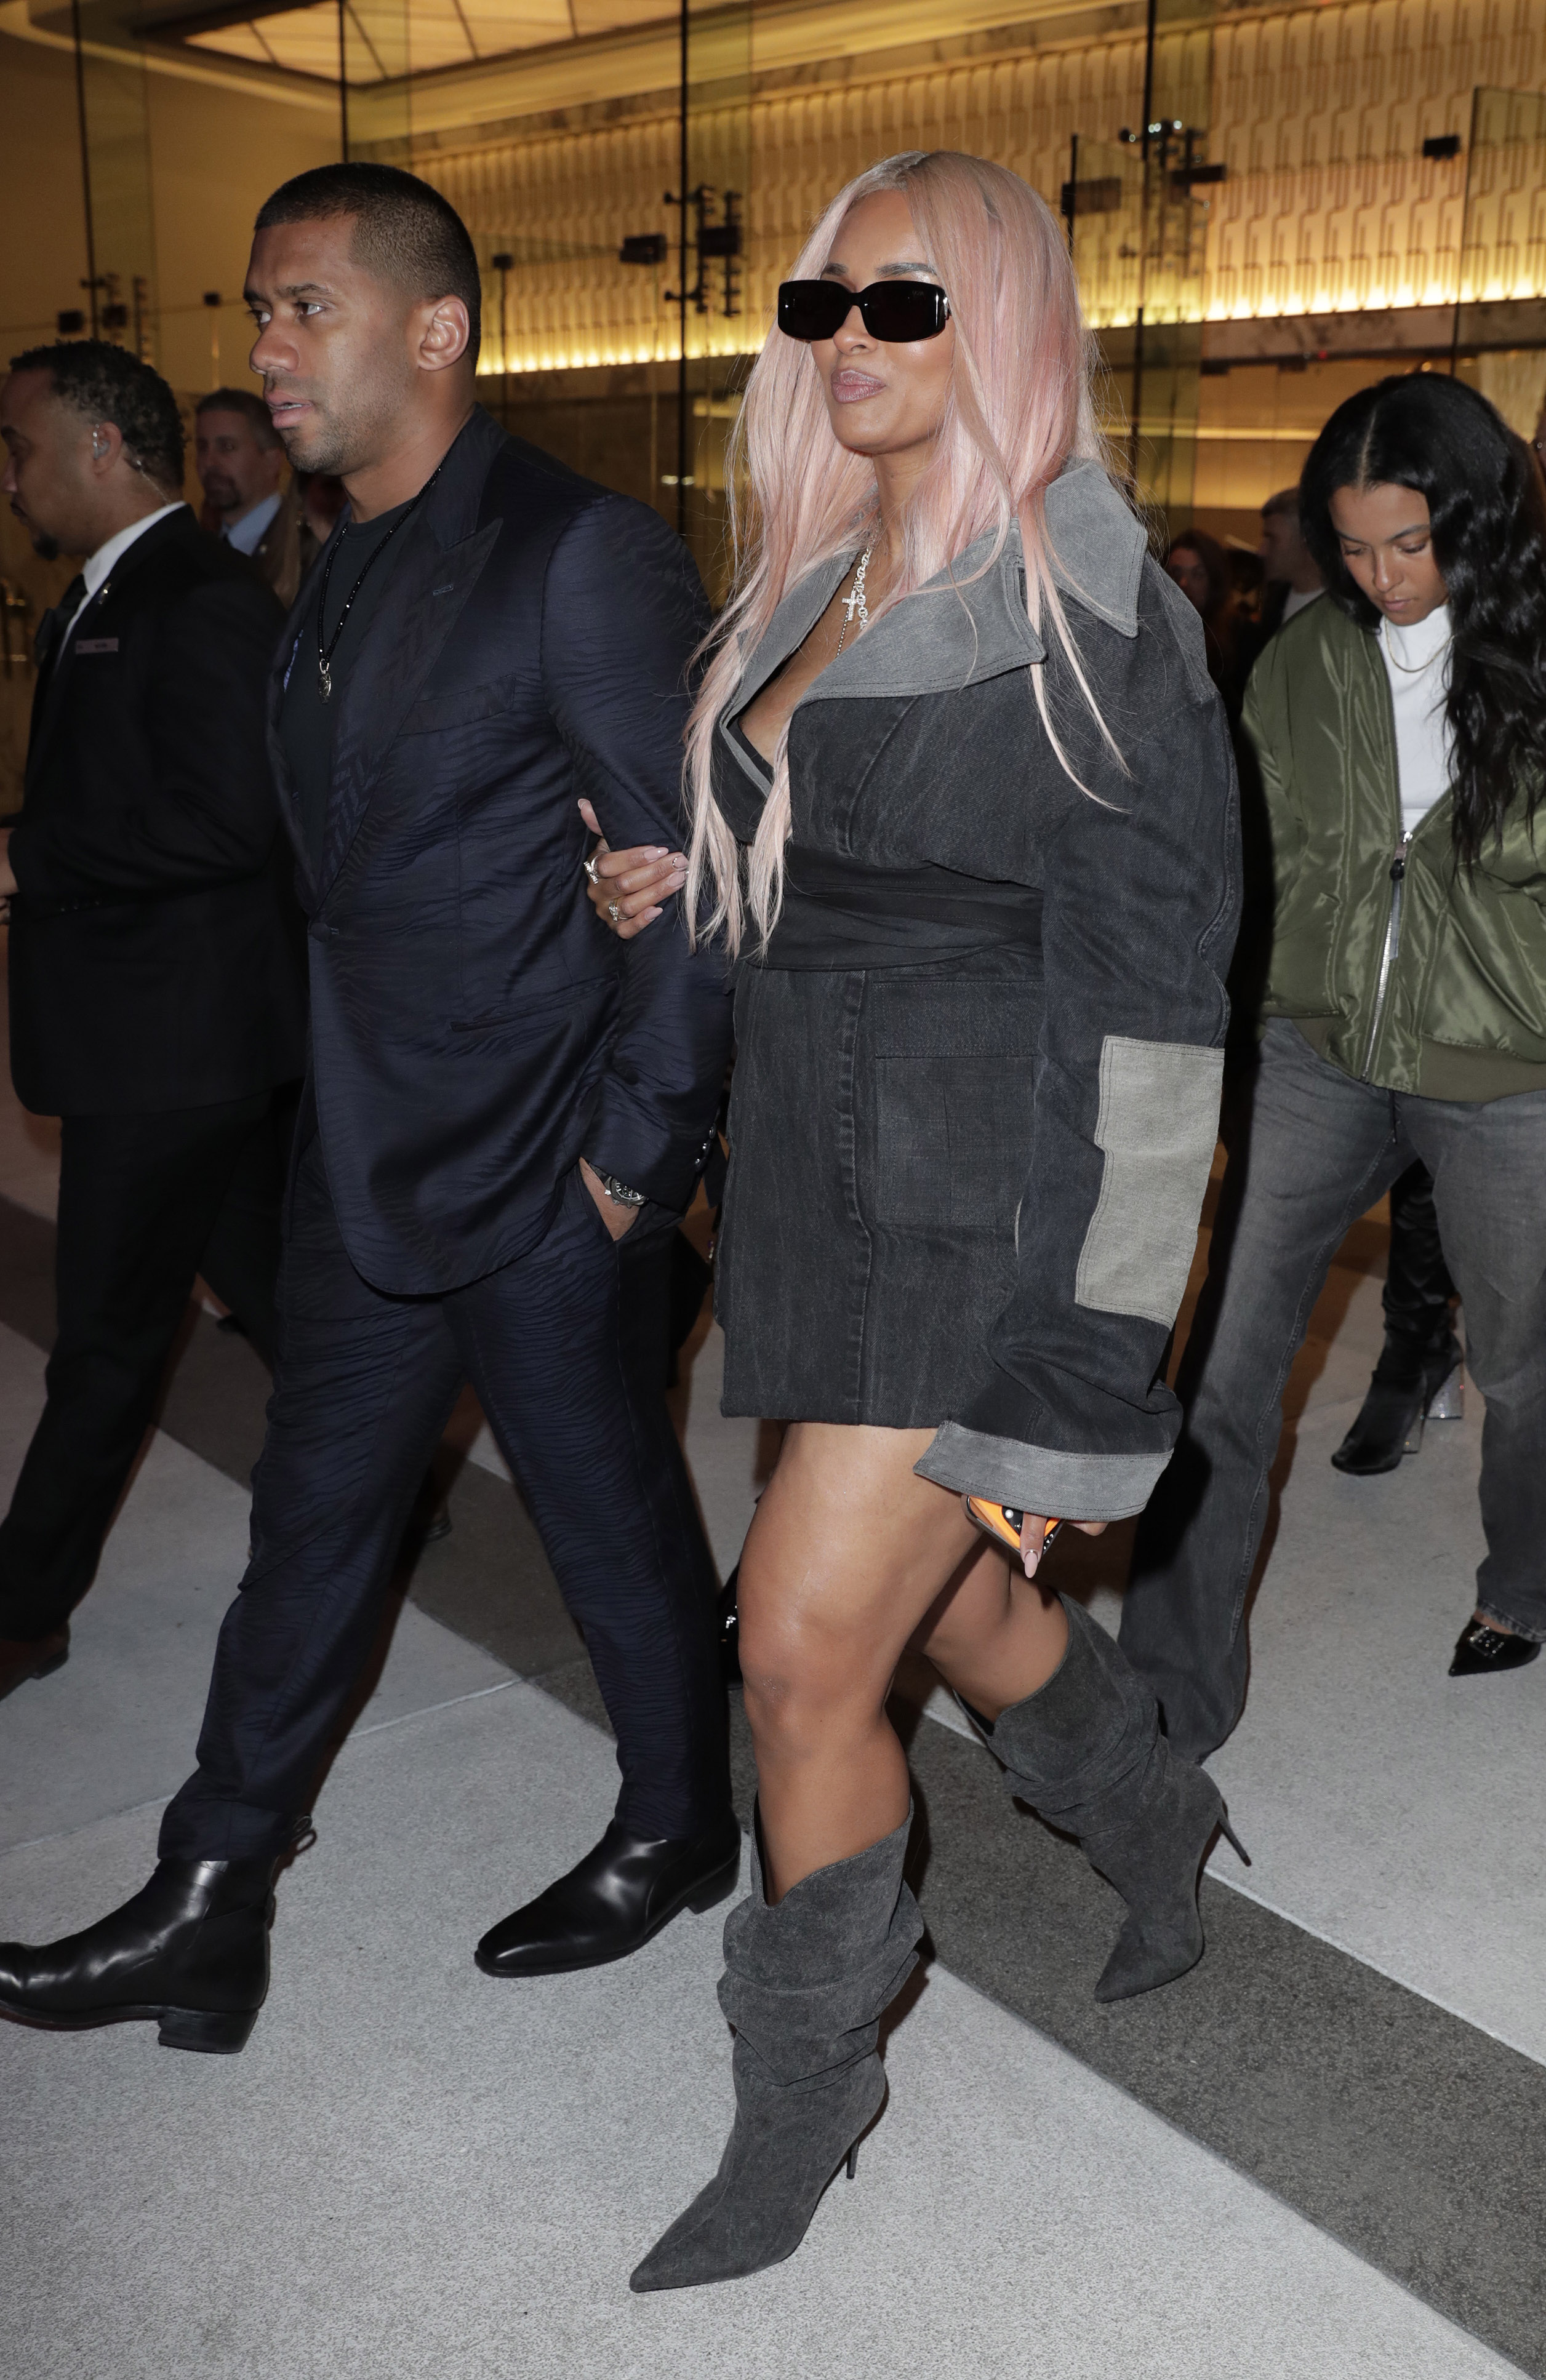 The pop star stunned in a pair of gray-heeled boots and a matching jacket with shades